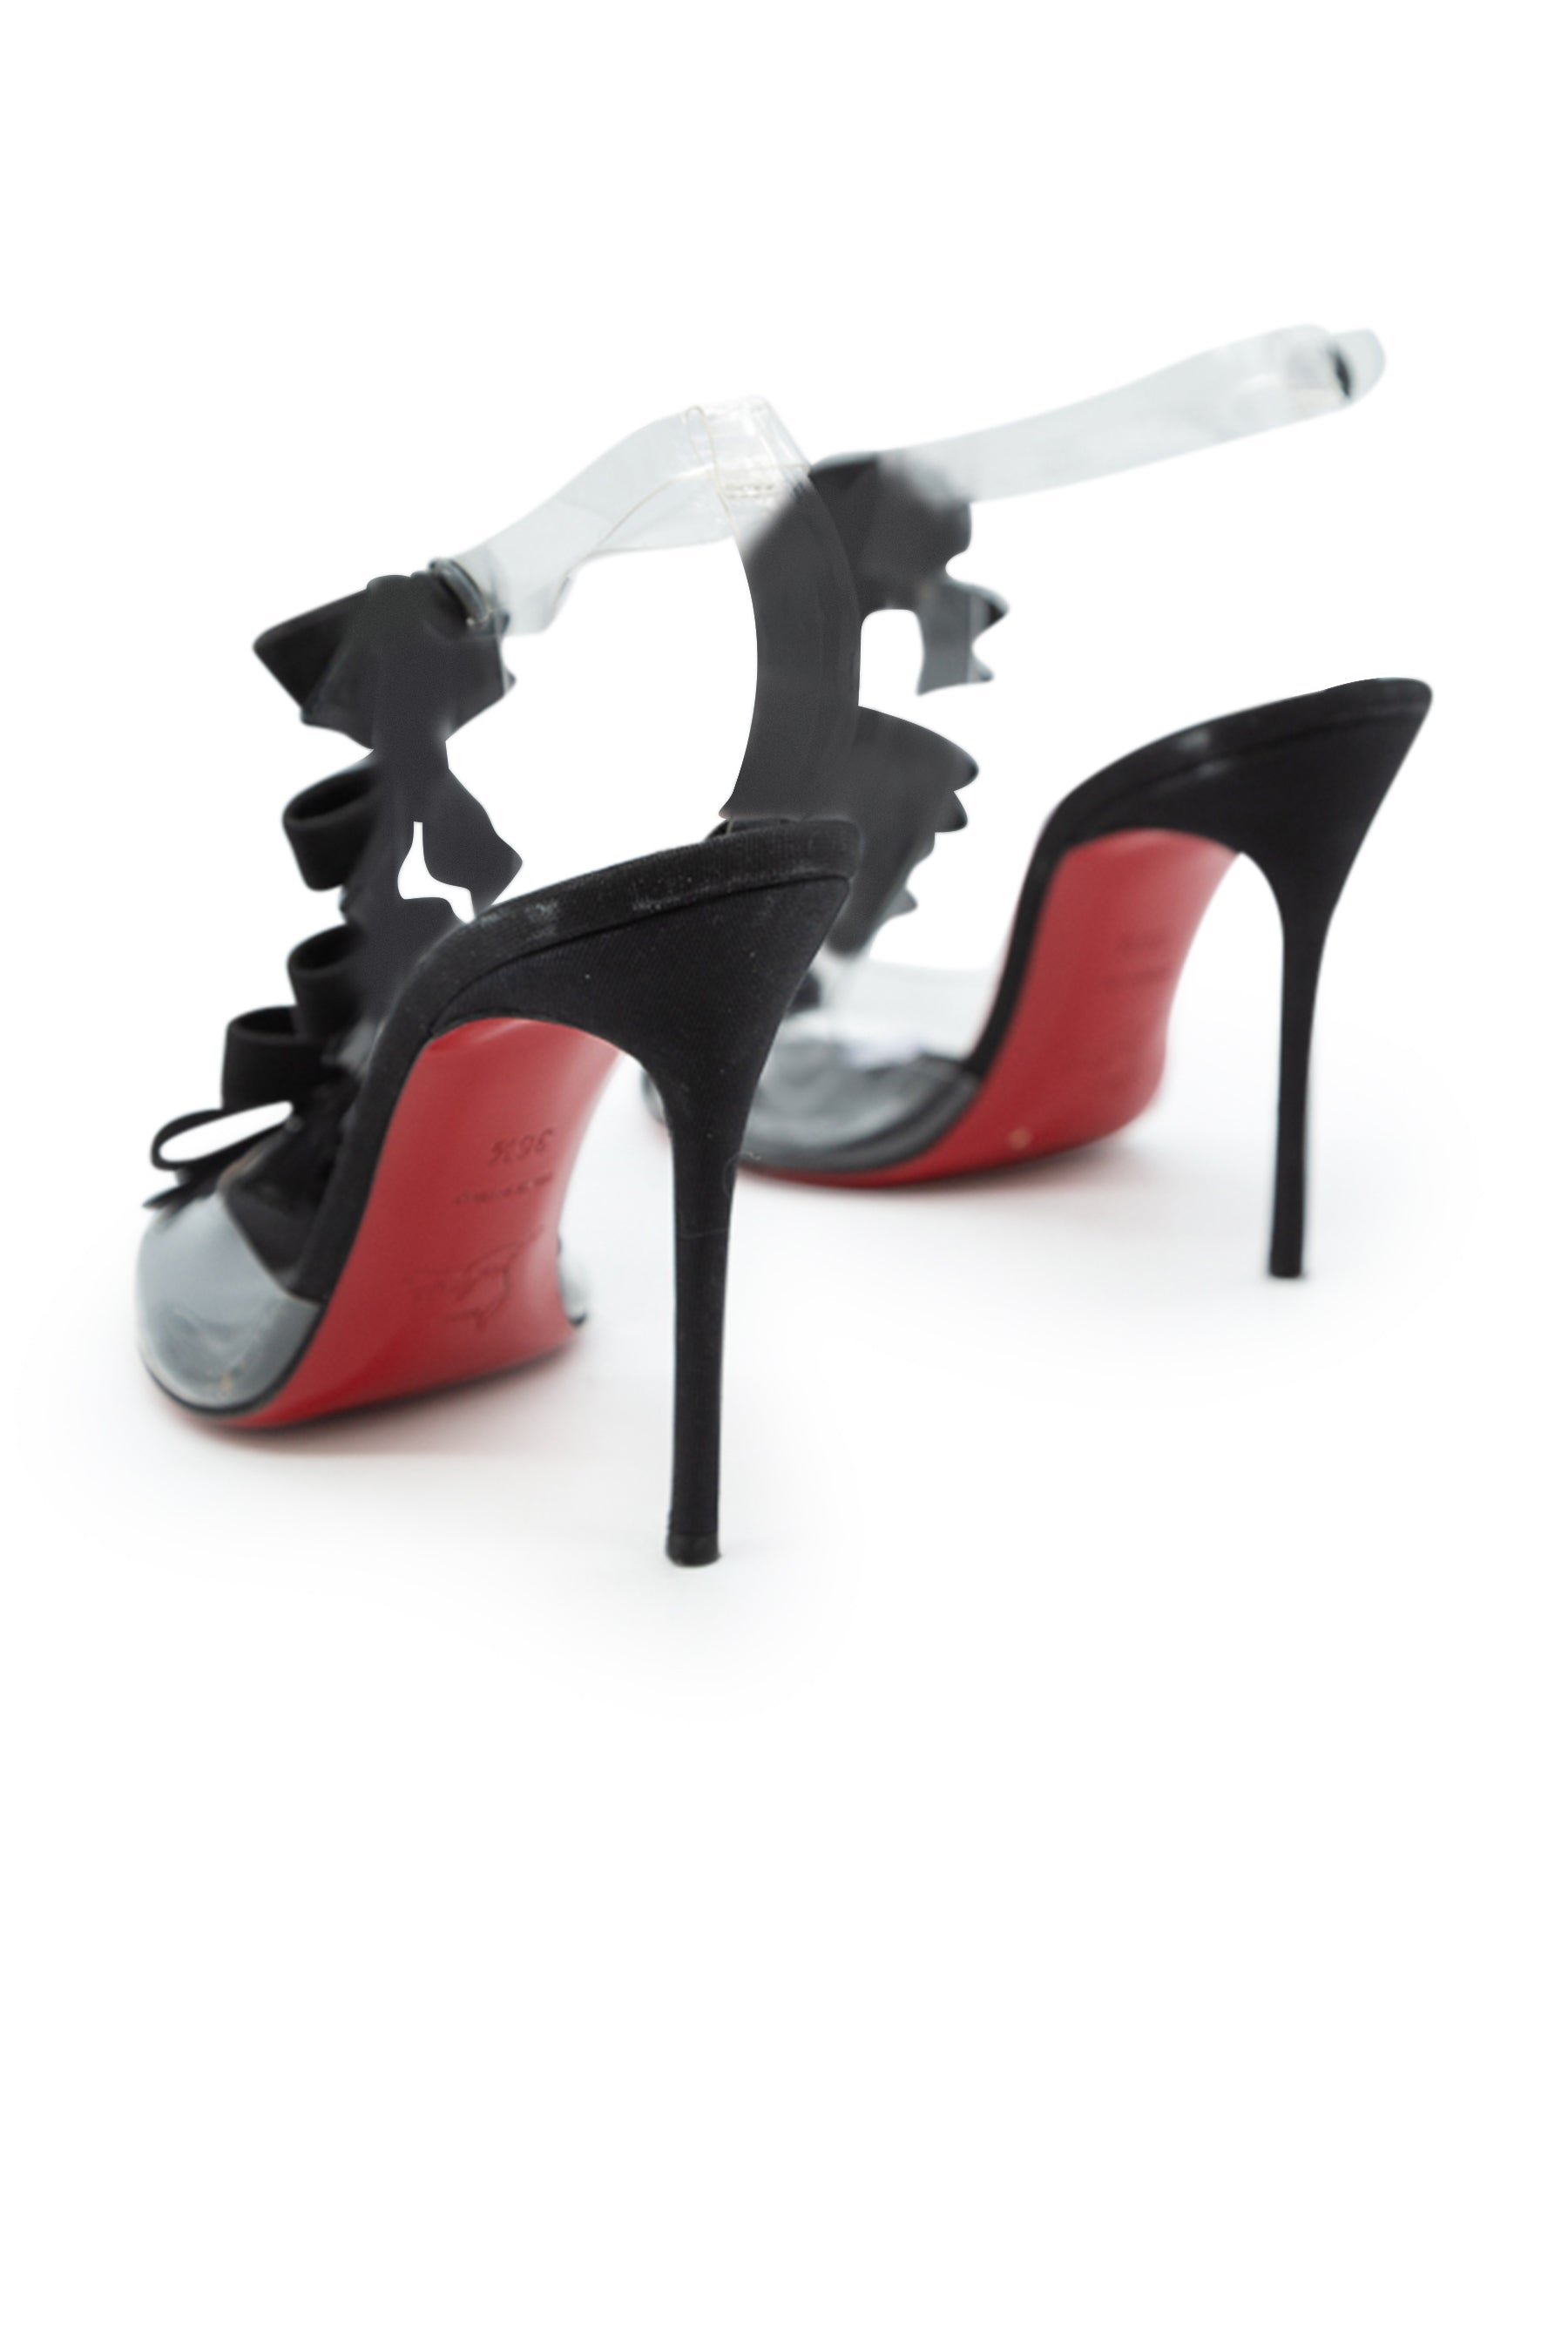 Why would you choose high heels while you know that won't be easy to wear  for a longer time? - Quora